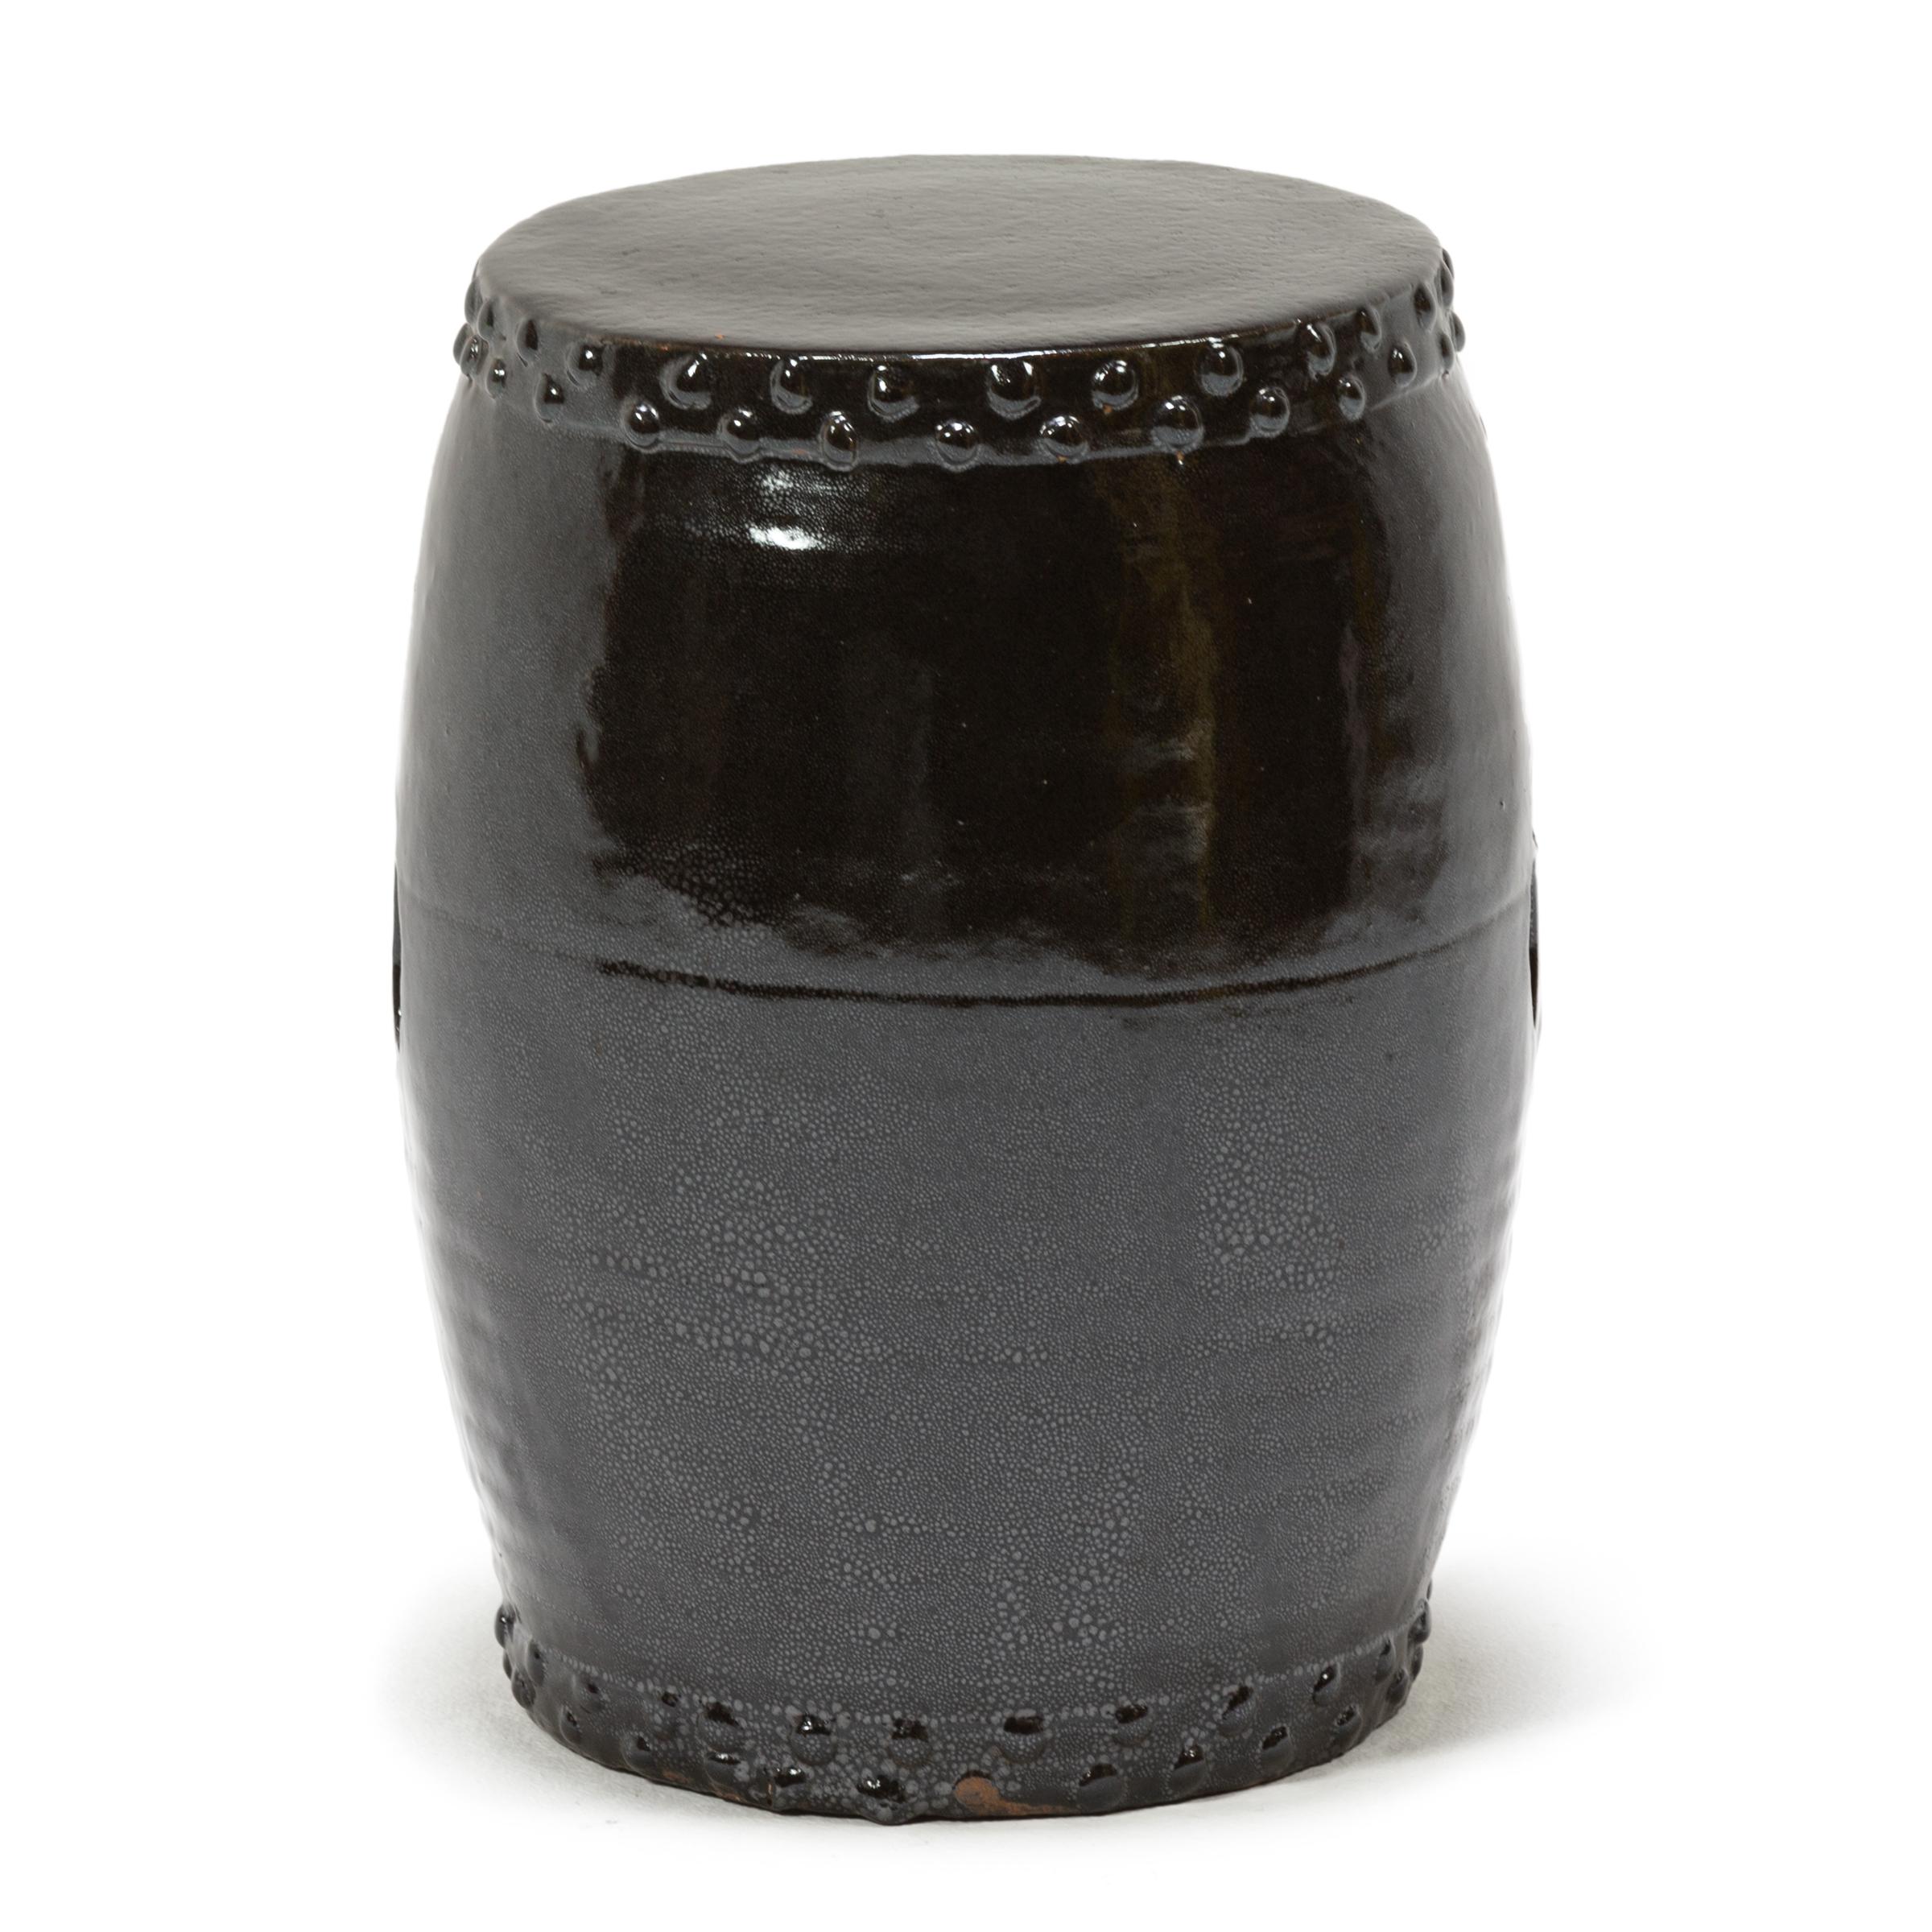 This early 20th-century ceramic garden stool from China's Zhejiang province keeps with tradition with its simple drum-form shape, cloaked in a dark brown-black glaze. Ringing both the top and bottom is a pattern of boss-head nails that imitate those